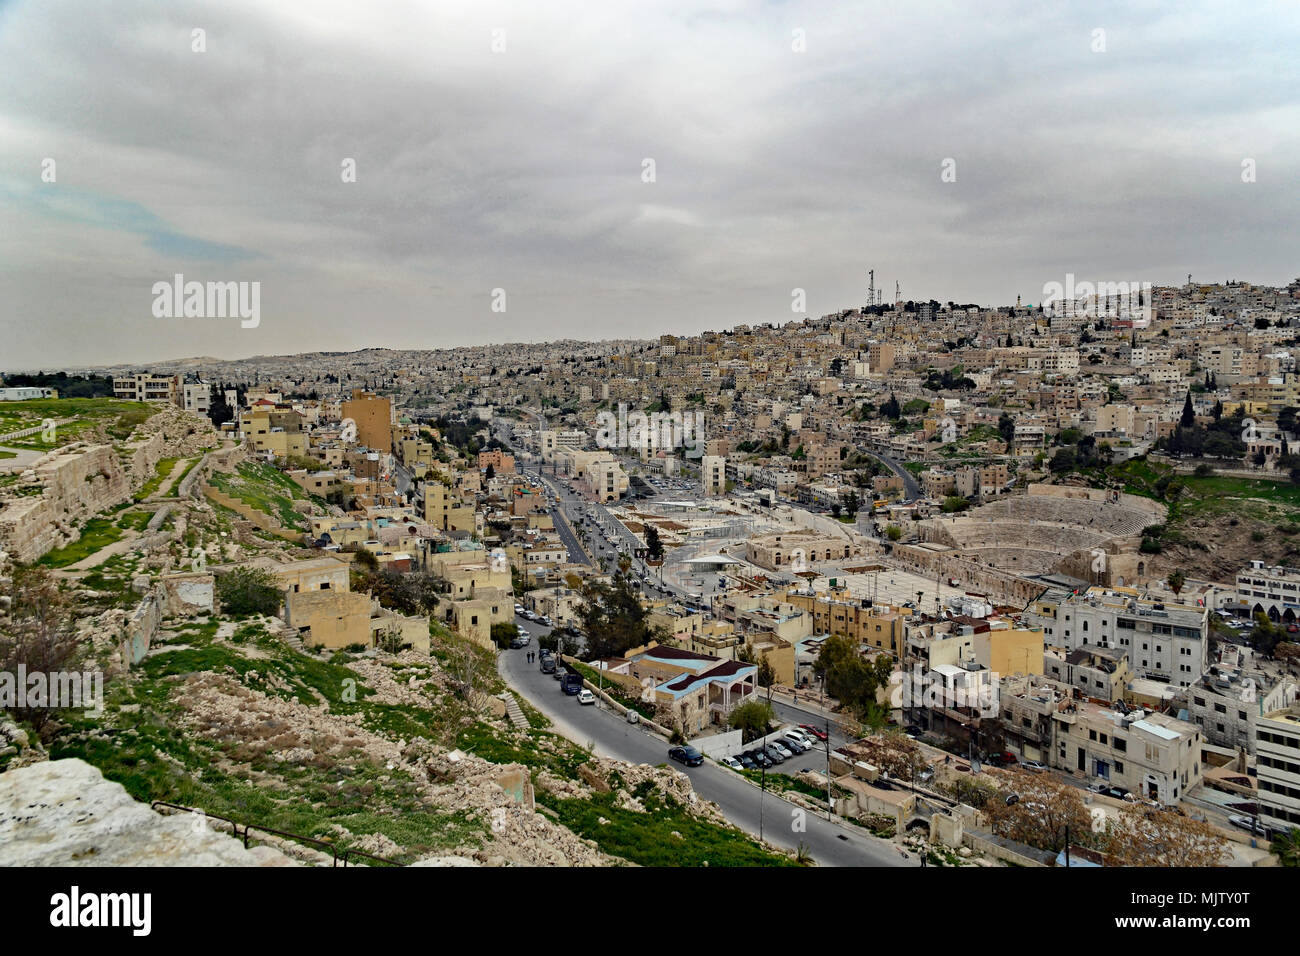 View of the Roman ruins from the Citadel in the old part of Amman, Jordan. Stock Photo